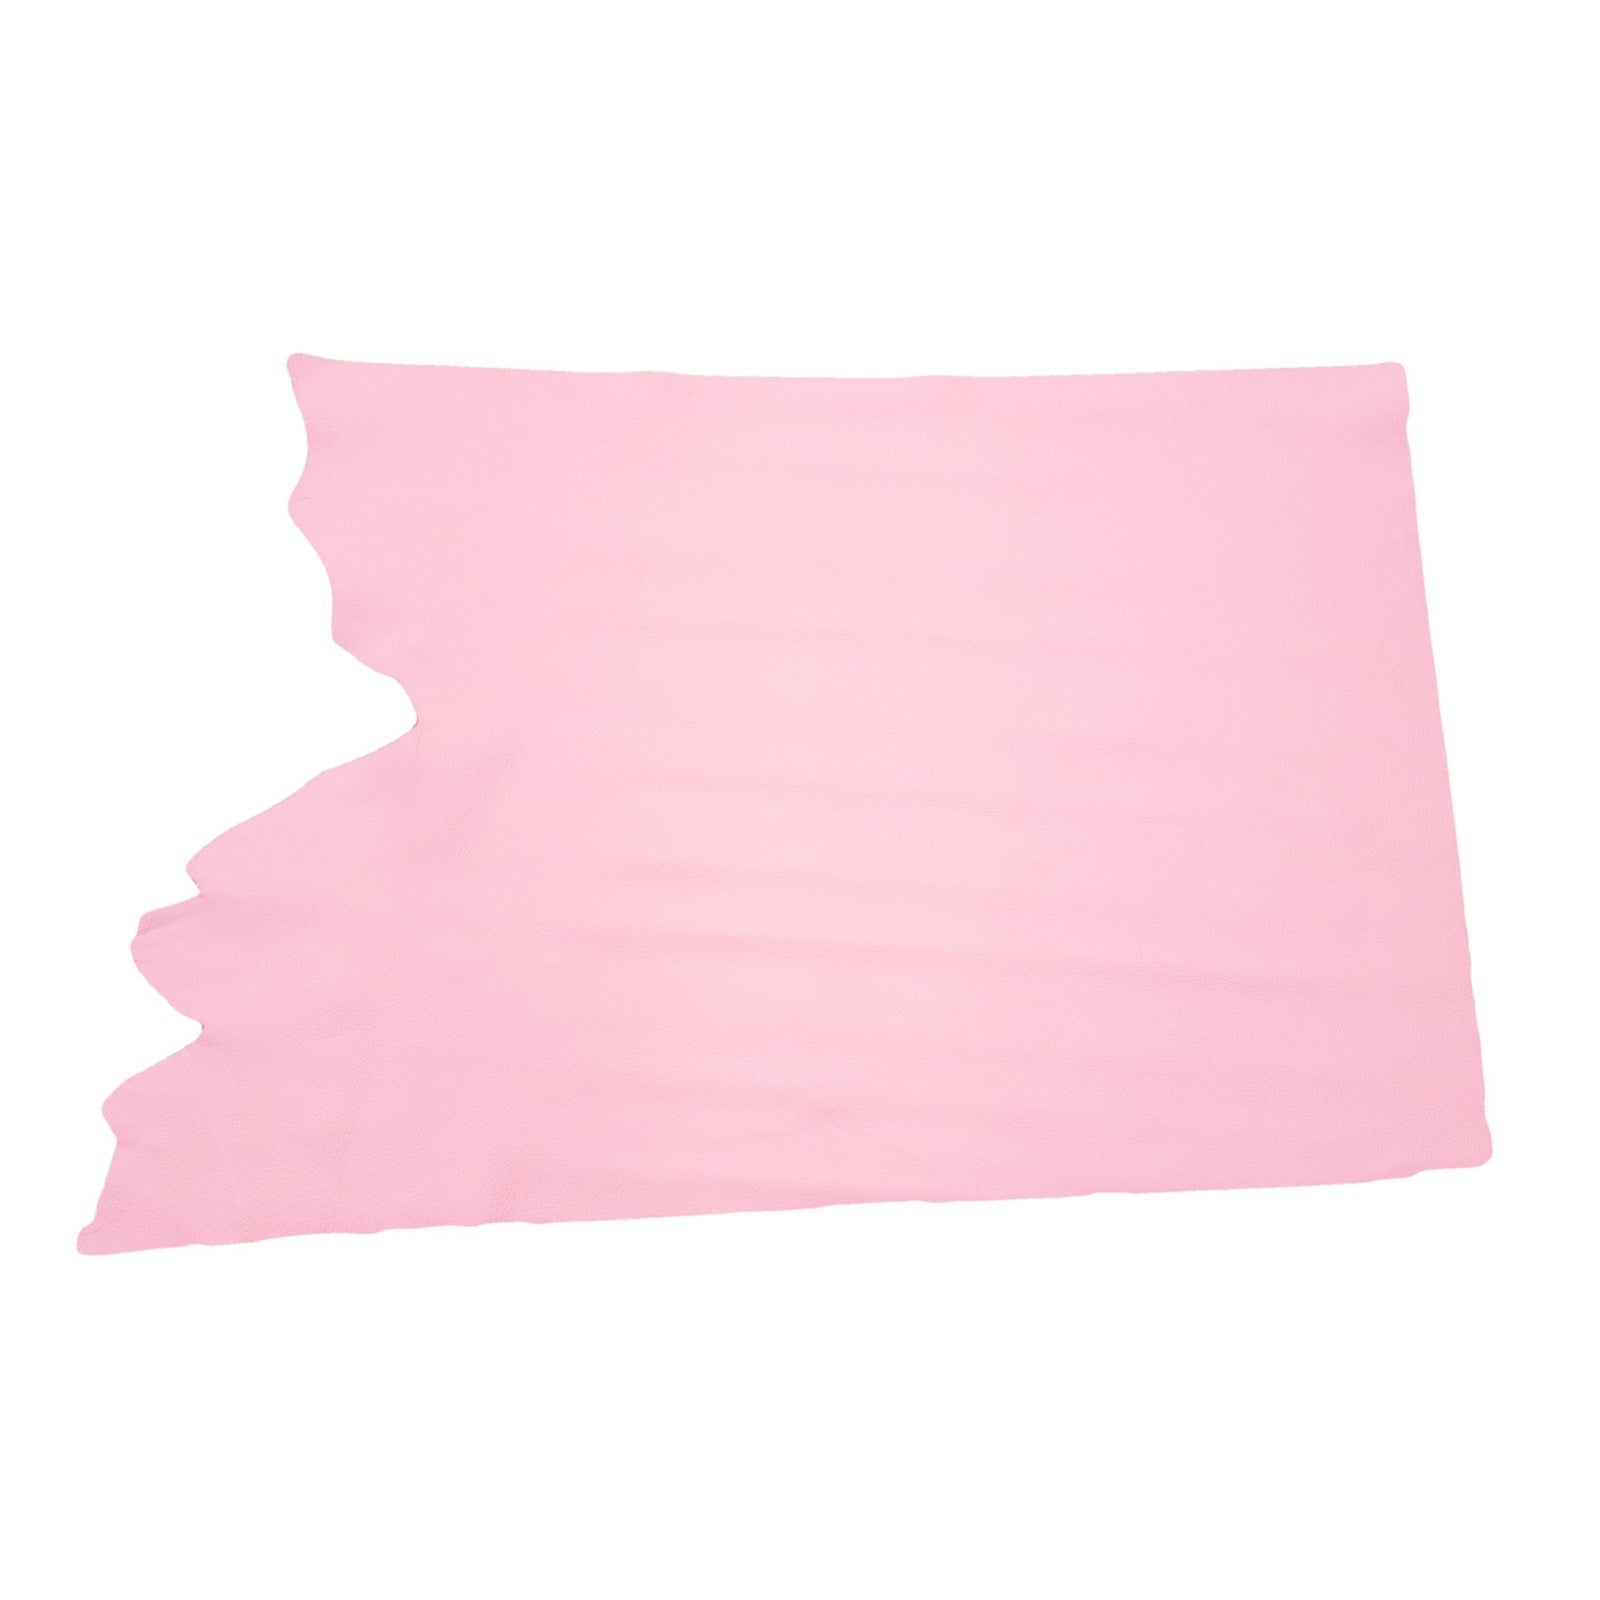 Pasadena Perfect Pink Tried n True 3-4 oz Leather Cow Hides, 6.5-7.5 Square Foot / Project Piece (Middle) | The Leather Guy